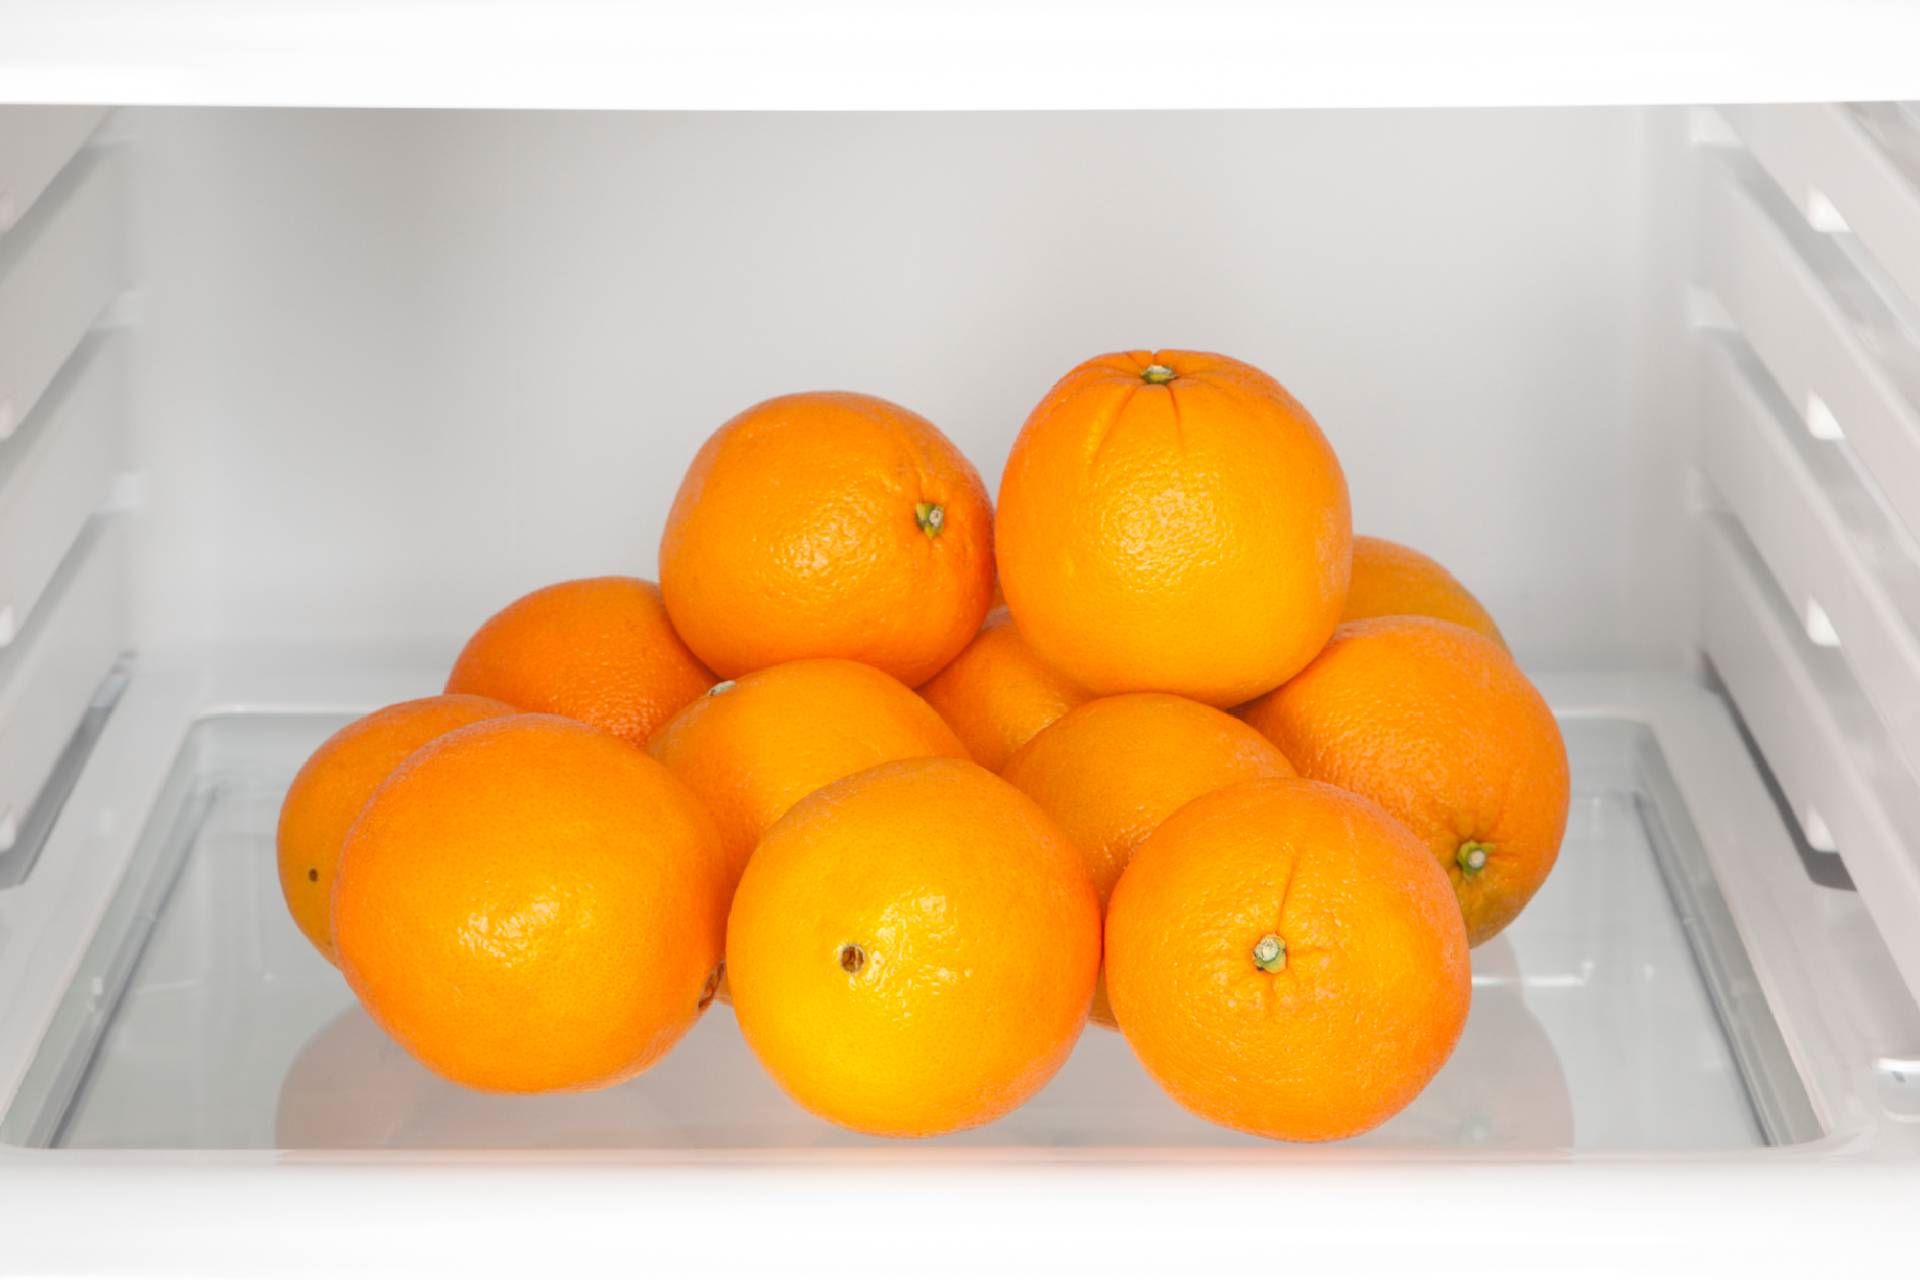 How To Store Mandarin Oranges In The Refrigerator